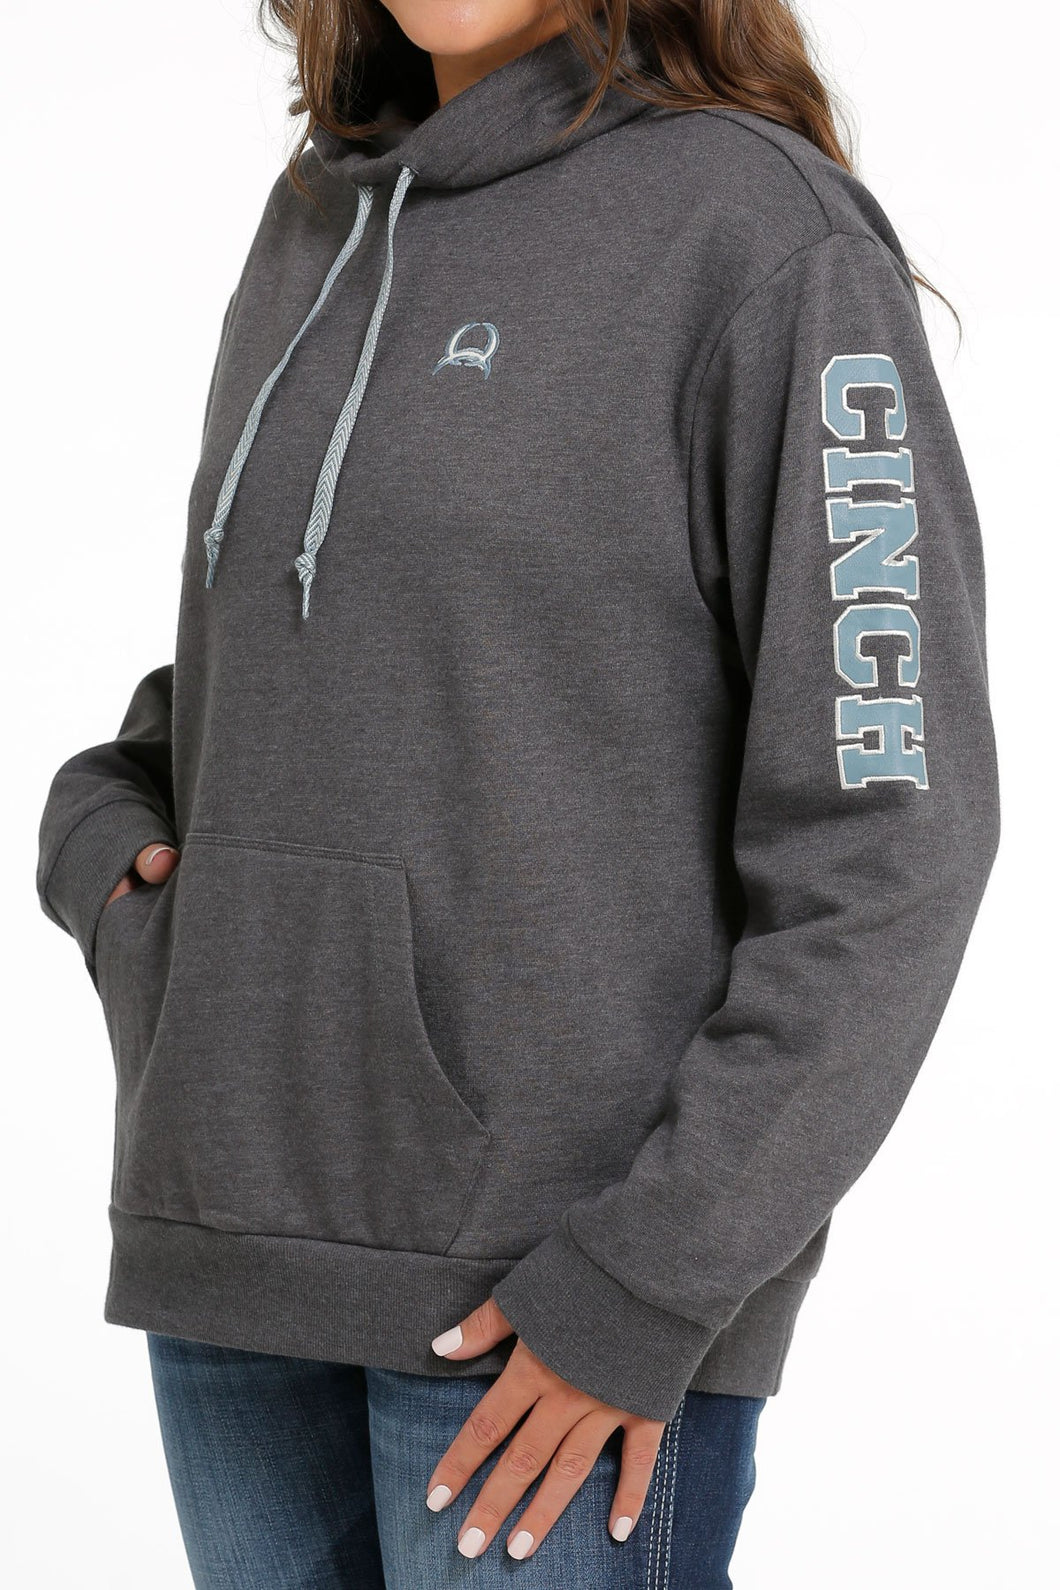 WOMEN'S FRENCH TERRY PULLOVER - GRAY